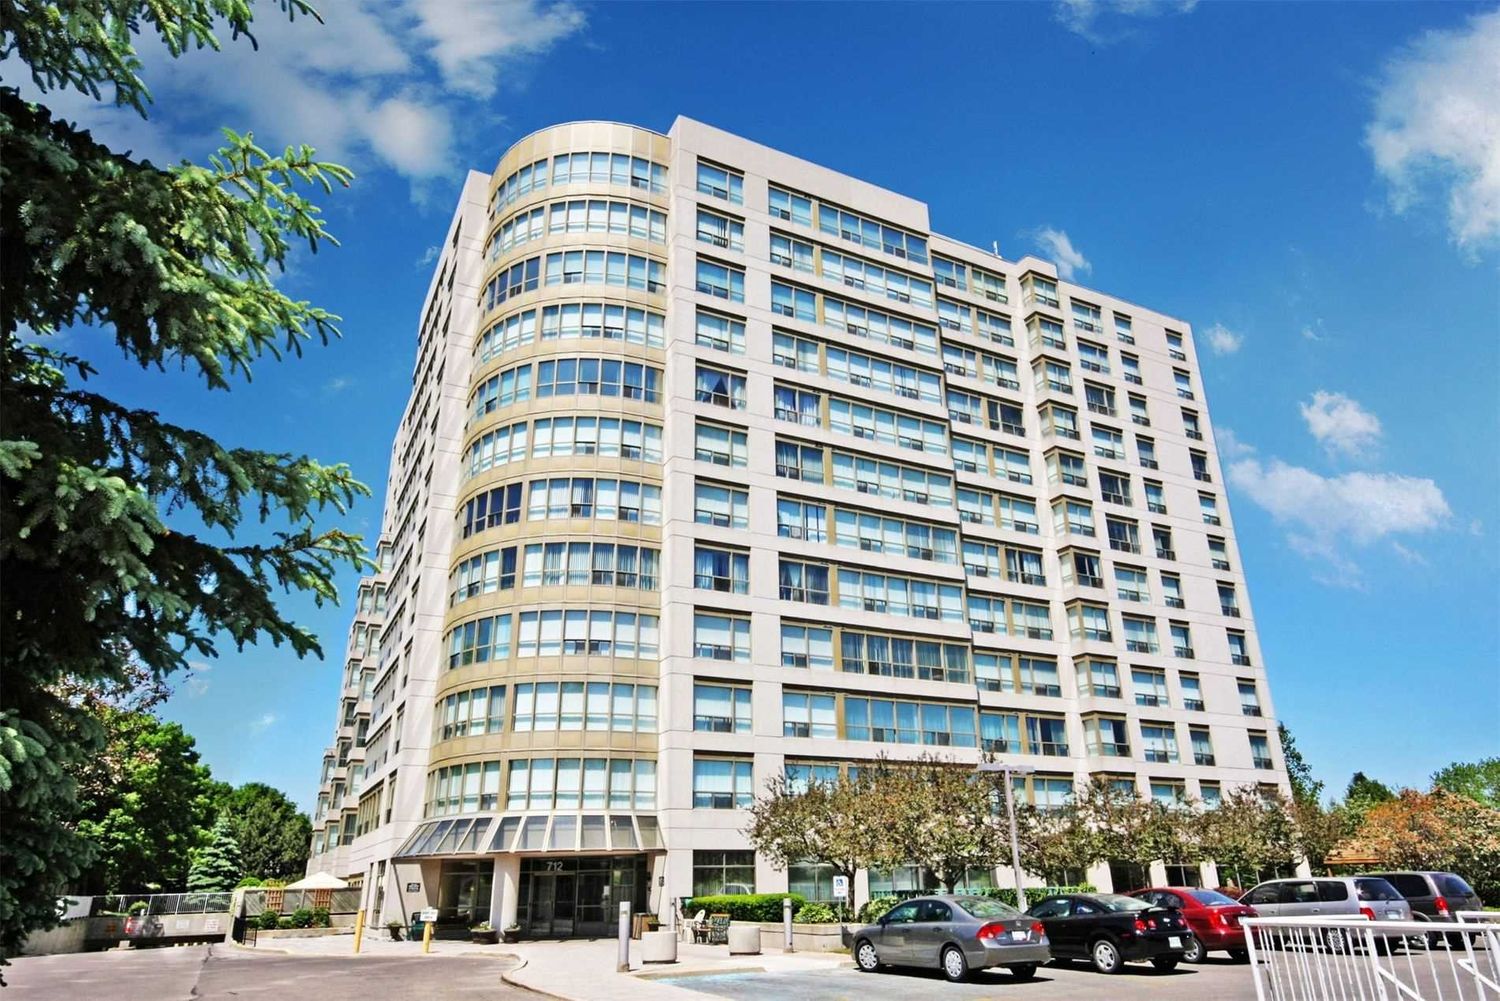 712 Rossland Road E. Connoisseur Condos is located in  Whitby, Toronto - image #2 of 2